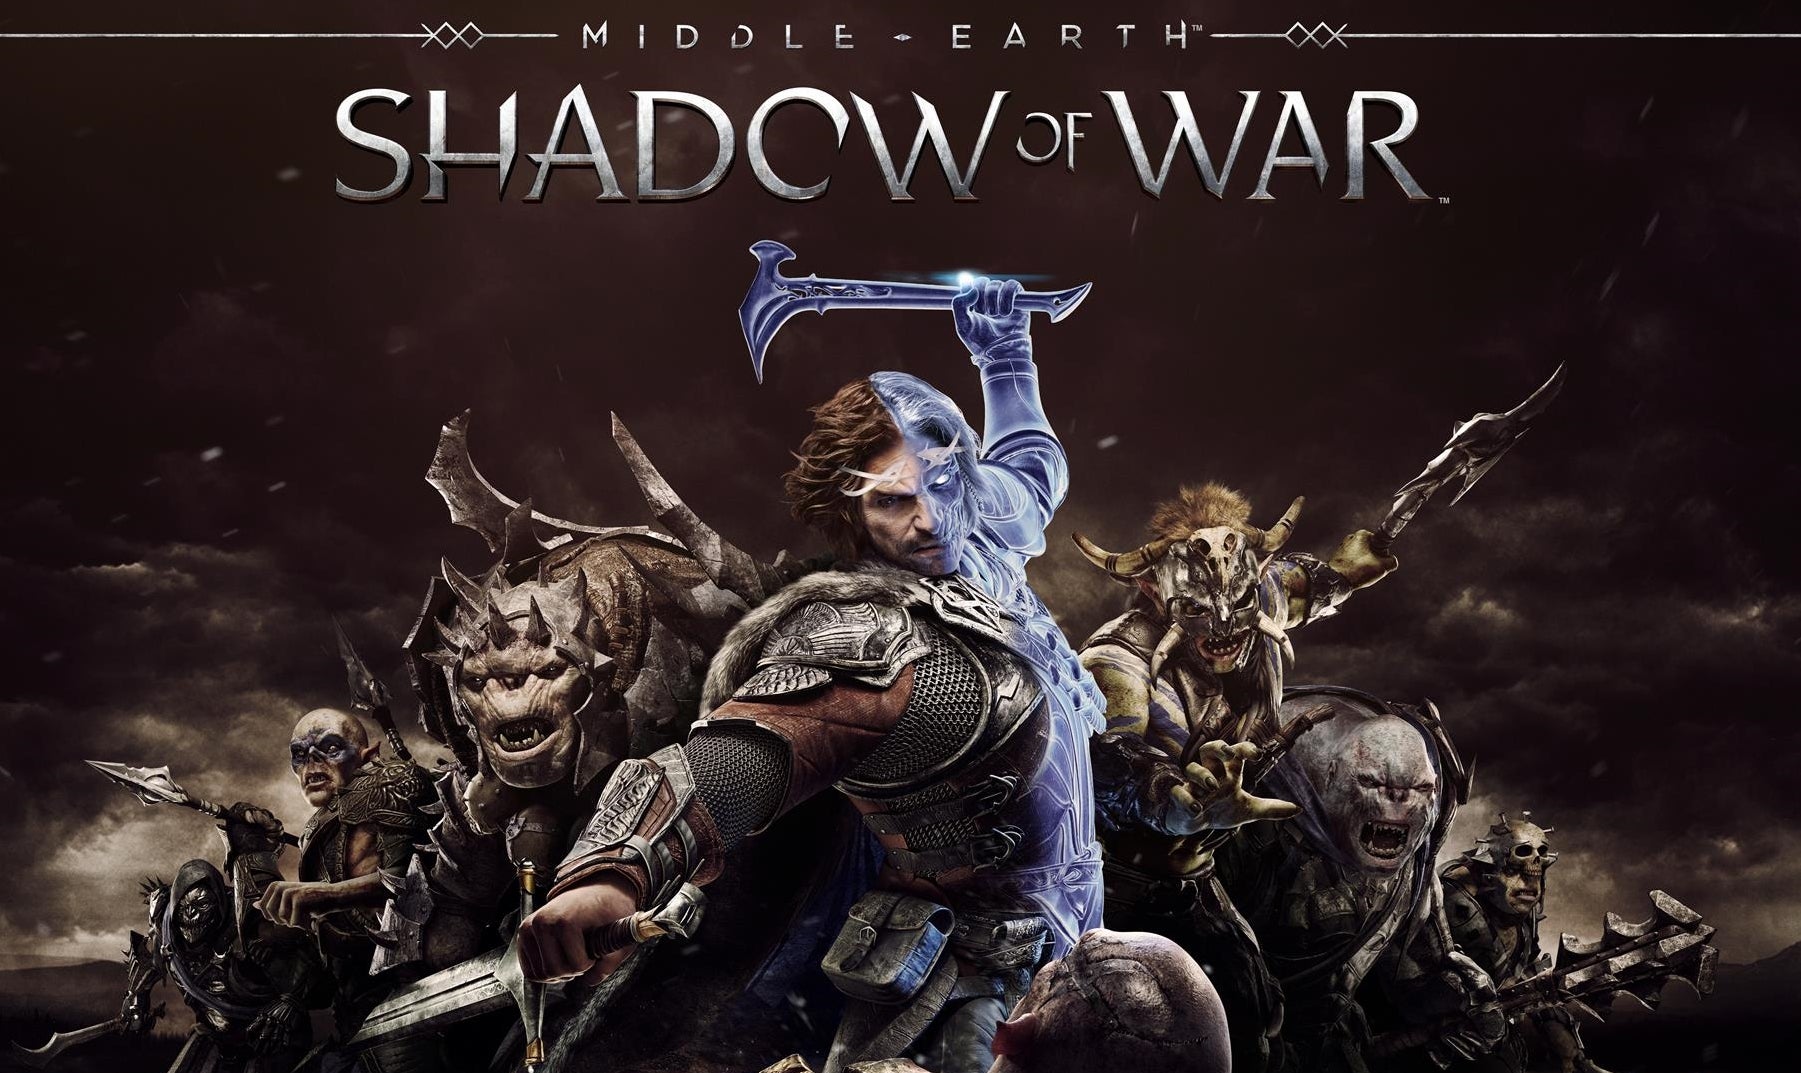 Image for Buy a GeForce GTX graphics card, get Middle-earth: Shadow of War for free